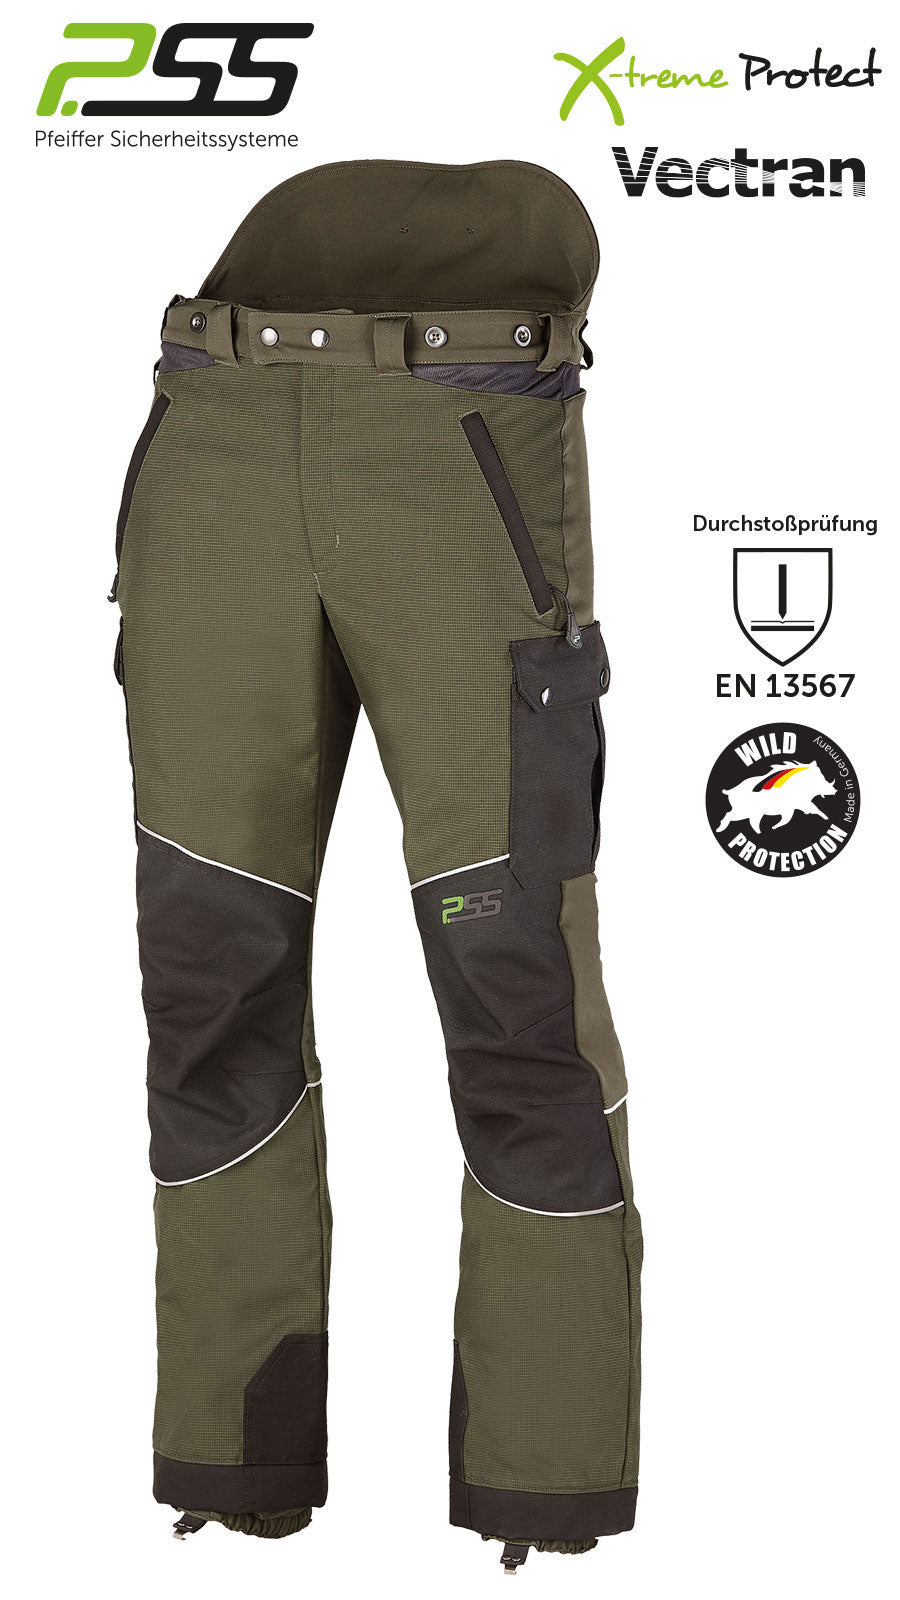 PSS X-treme Protect Wild boar hunt protection pants green